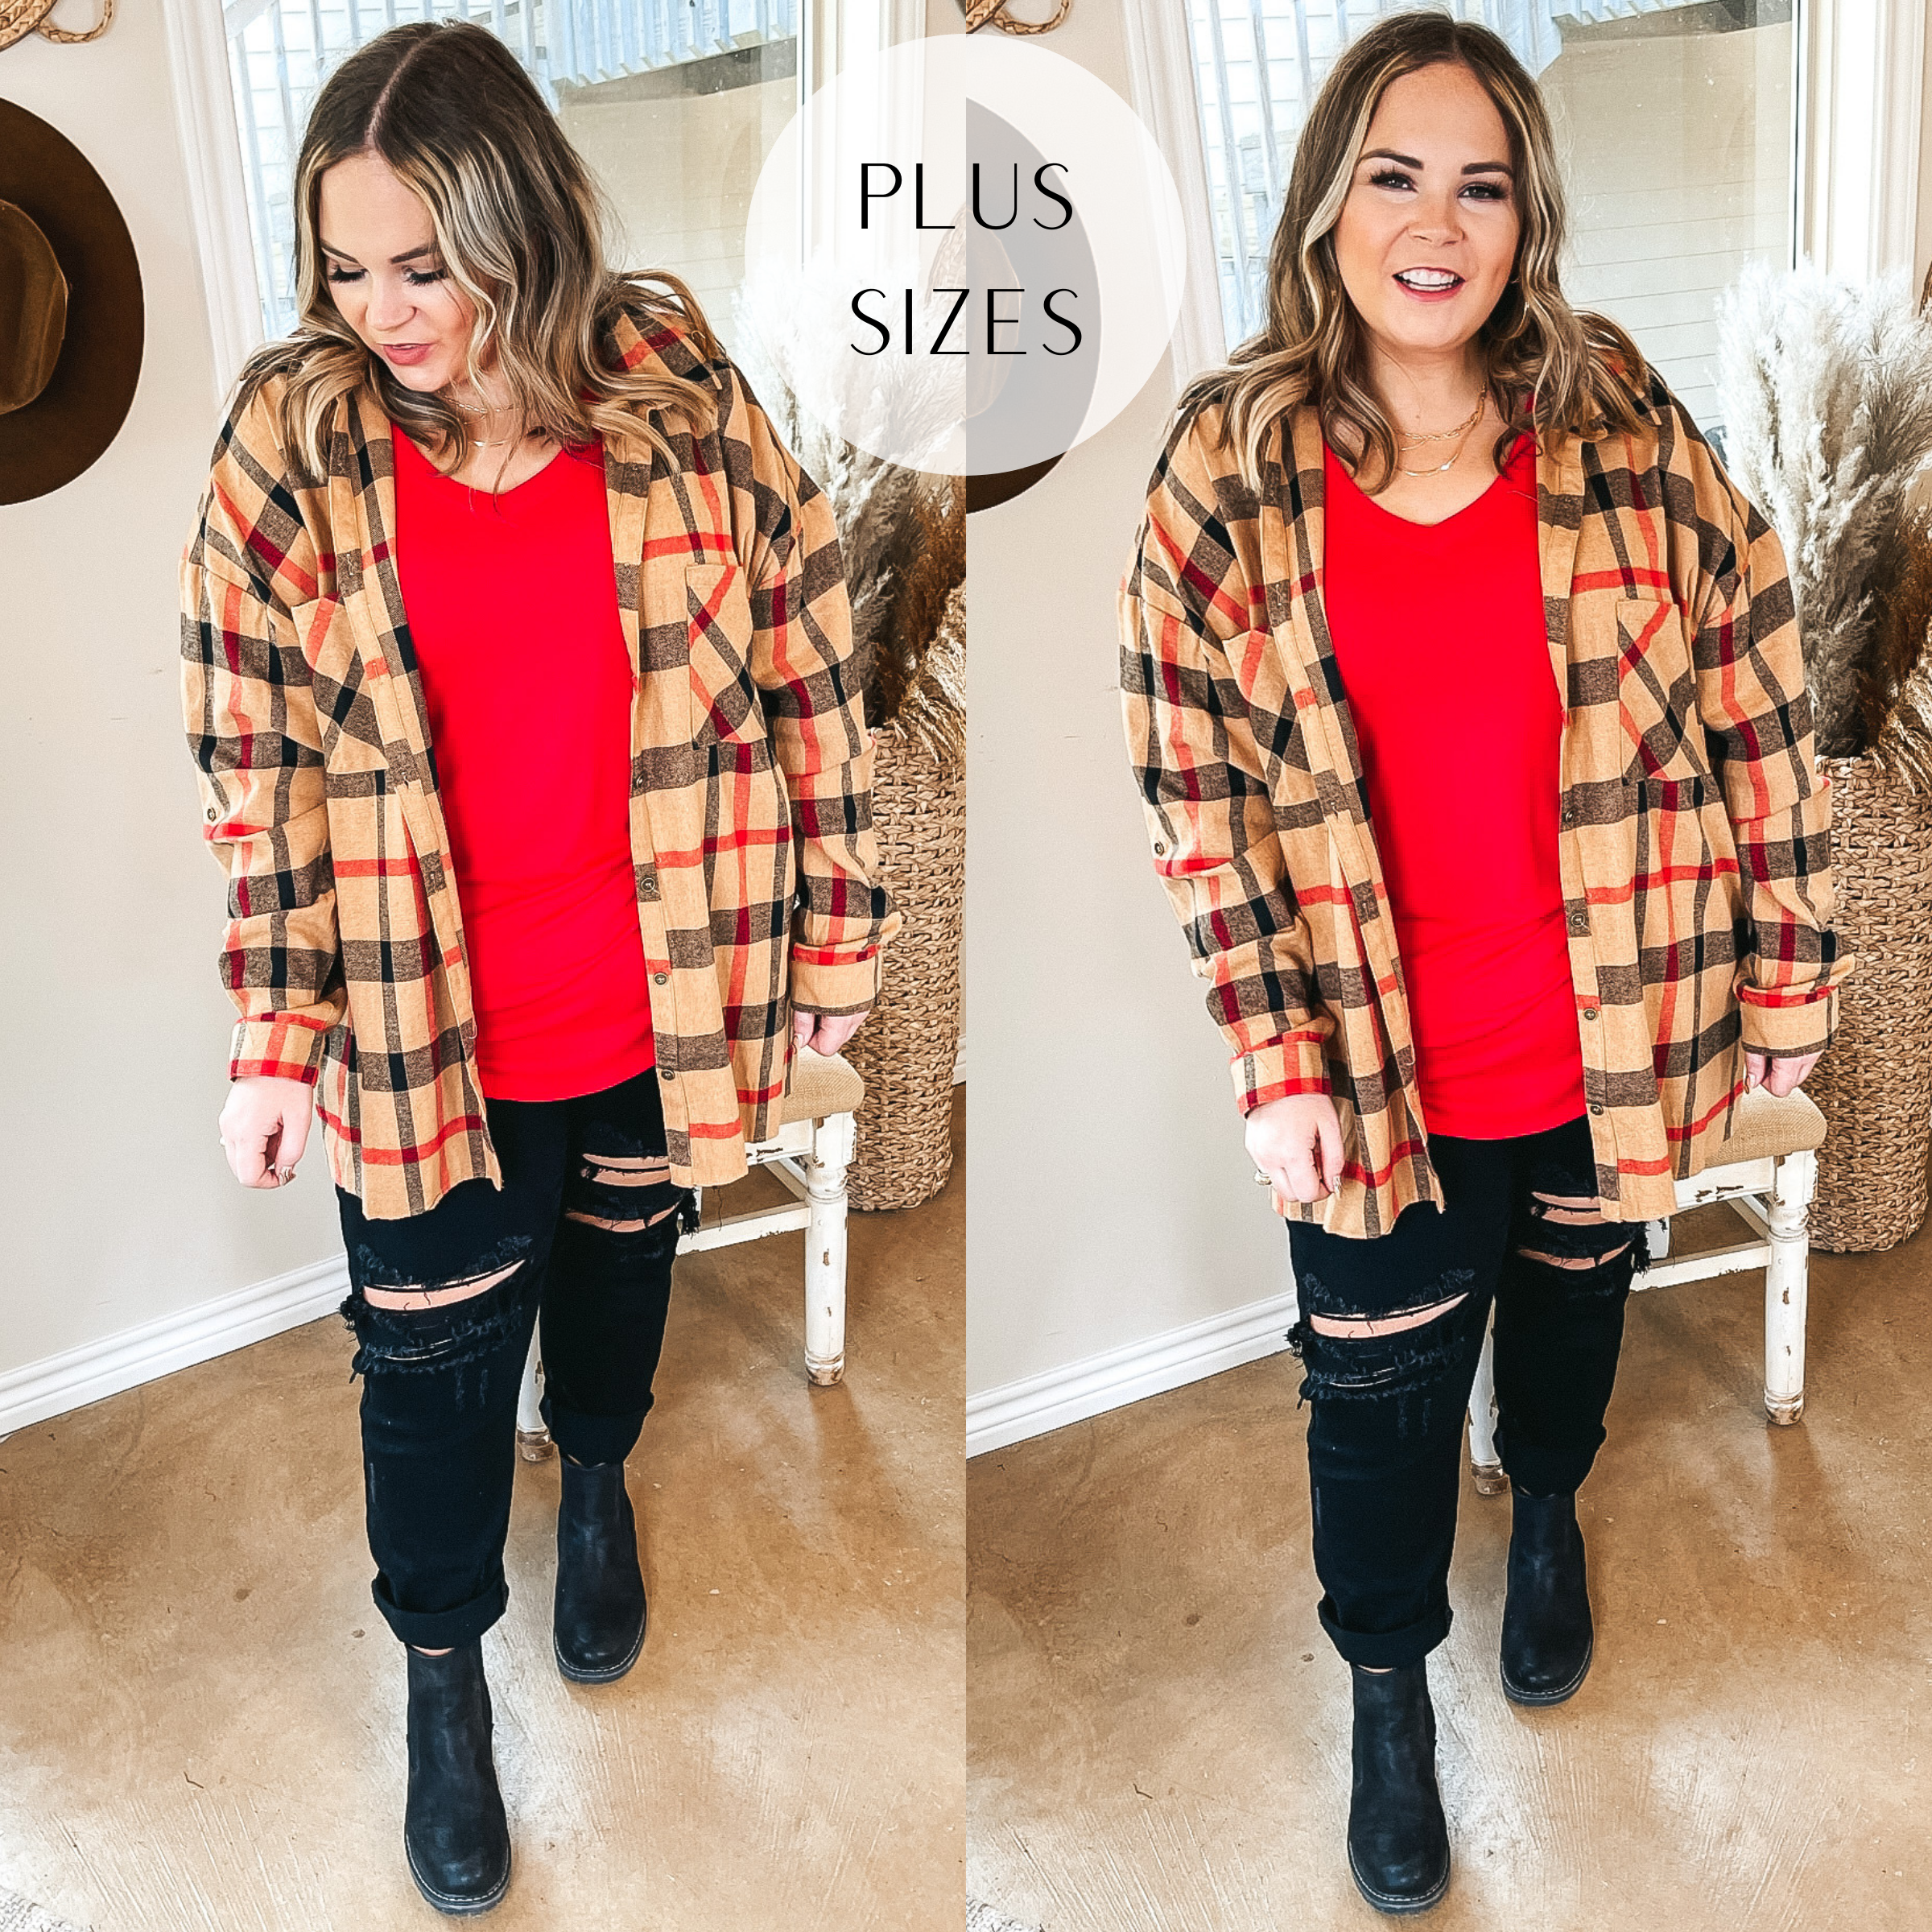 Model is wearing a plaid button up top open over a red tank top. Model has it paired with black distressed jeans, black booties, and gold jewelry.